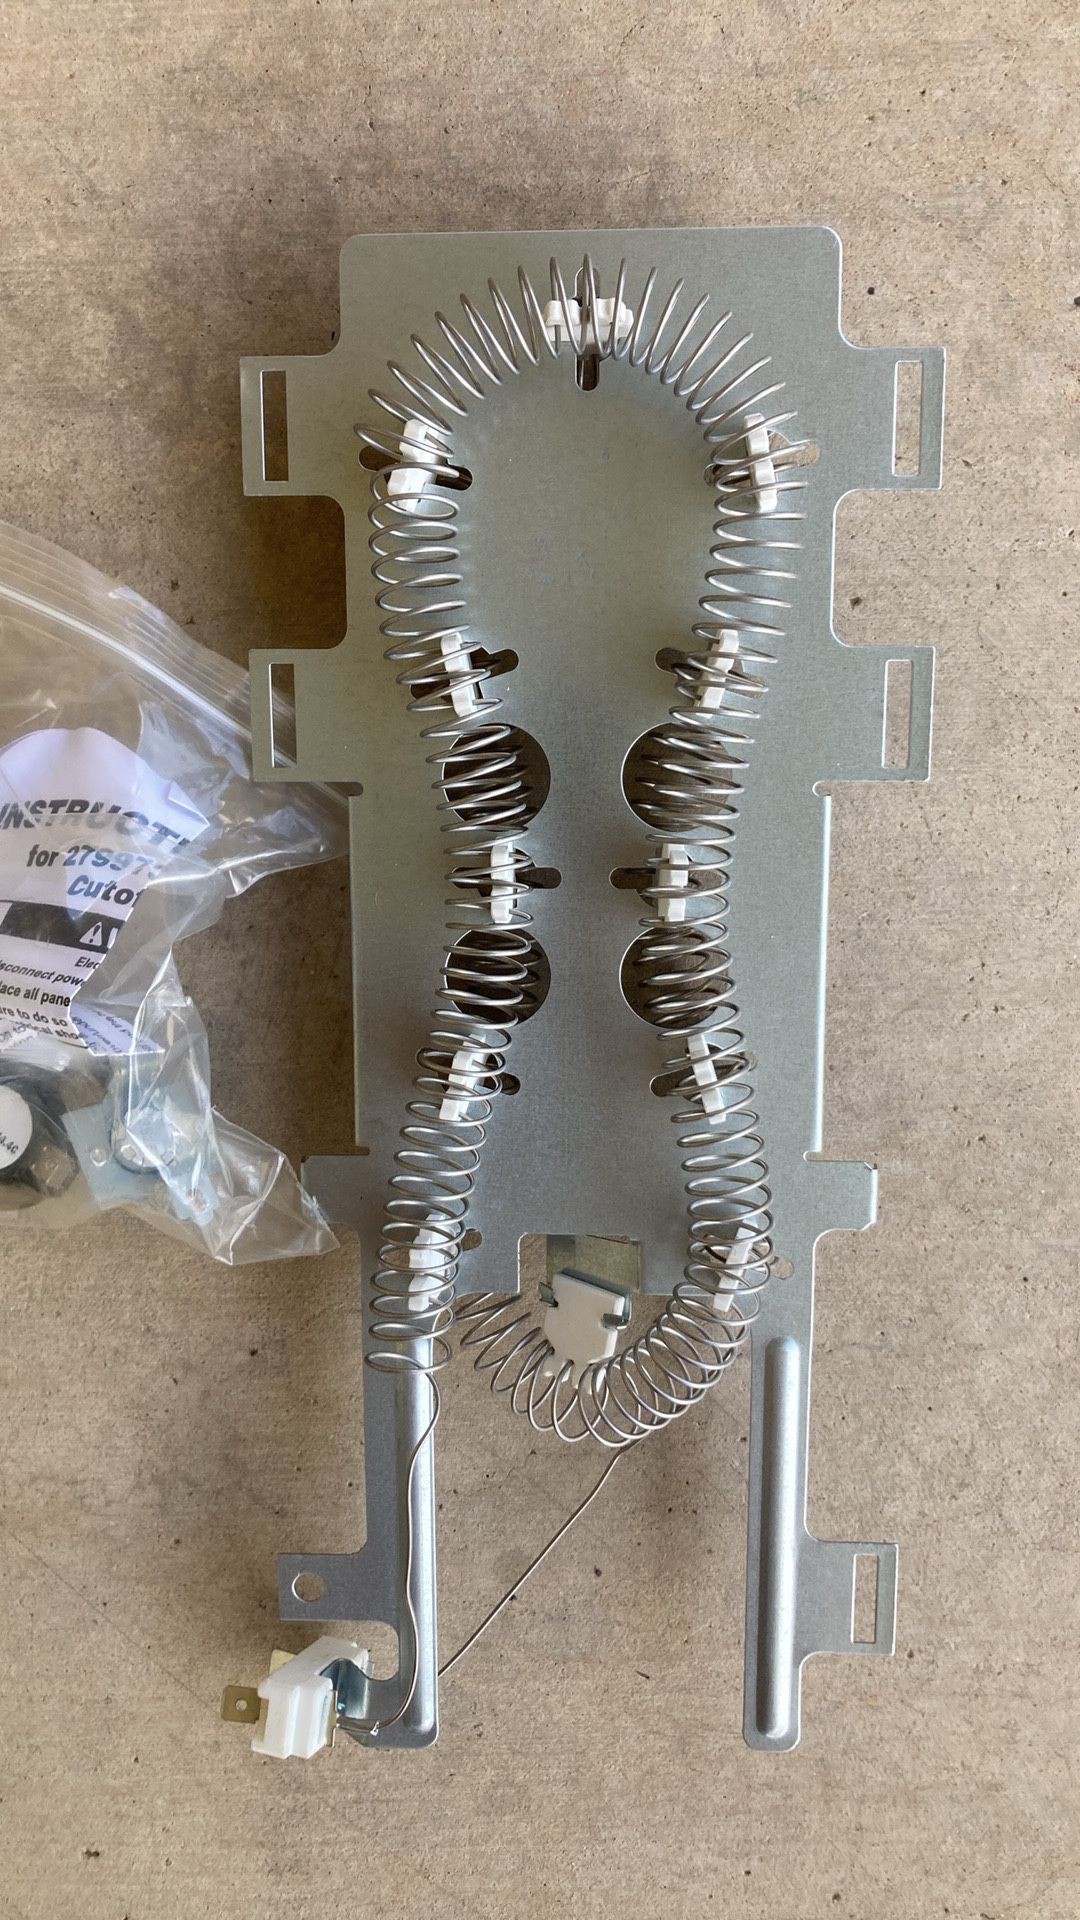  DRYER HEATING ELEMENT FOR WHIRLPOOL KENMORE WP